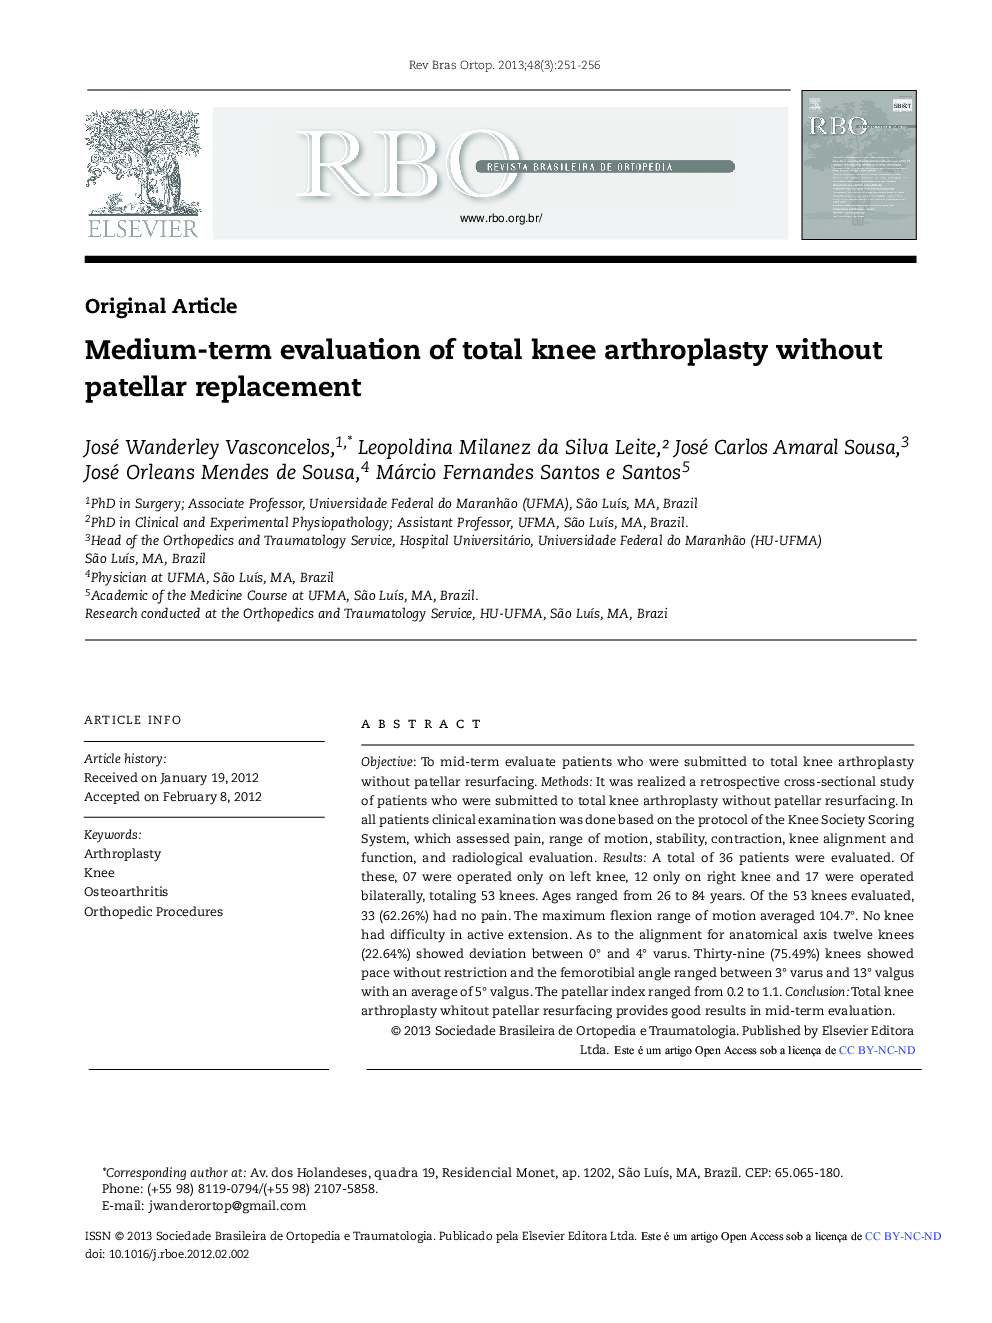 Medium-term evaluation of total knee arthroplasty without patellar replacement 